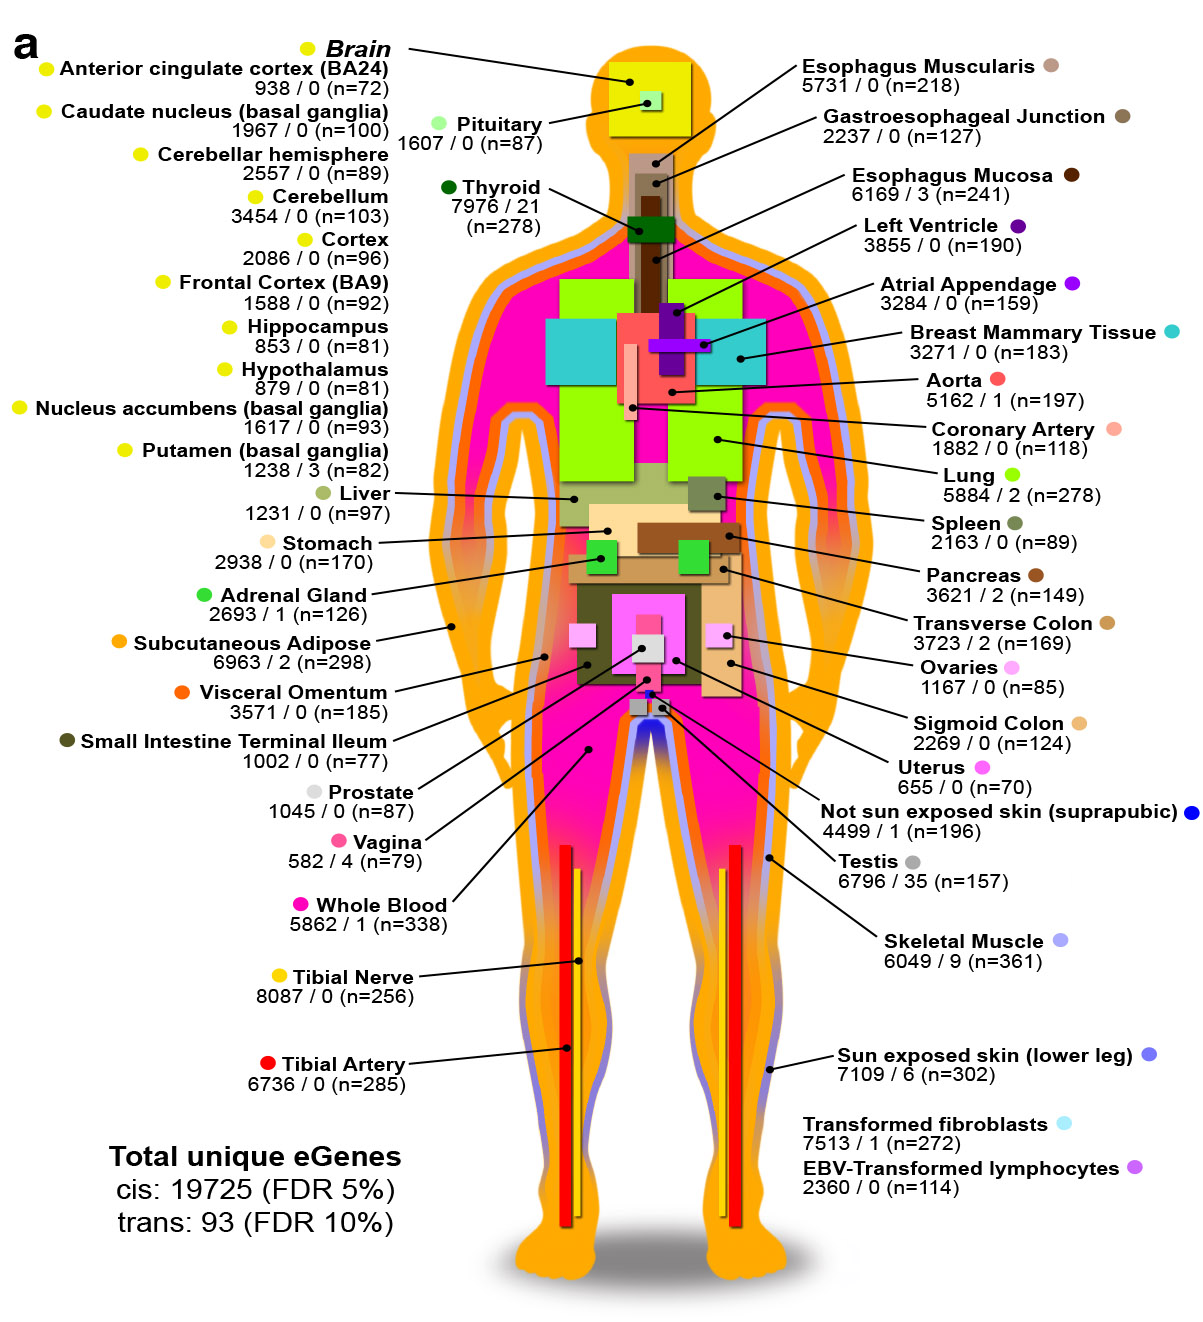 Illustration of human body with information about genes associated with 44 tissue types